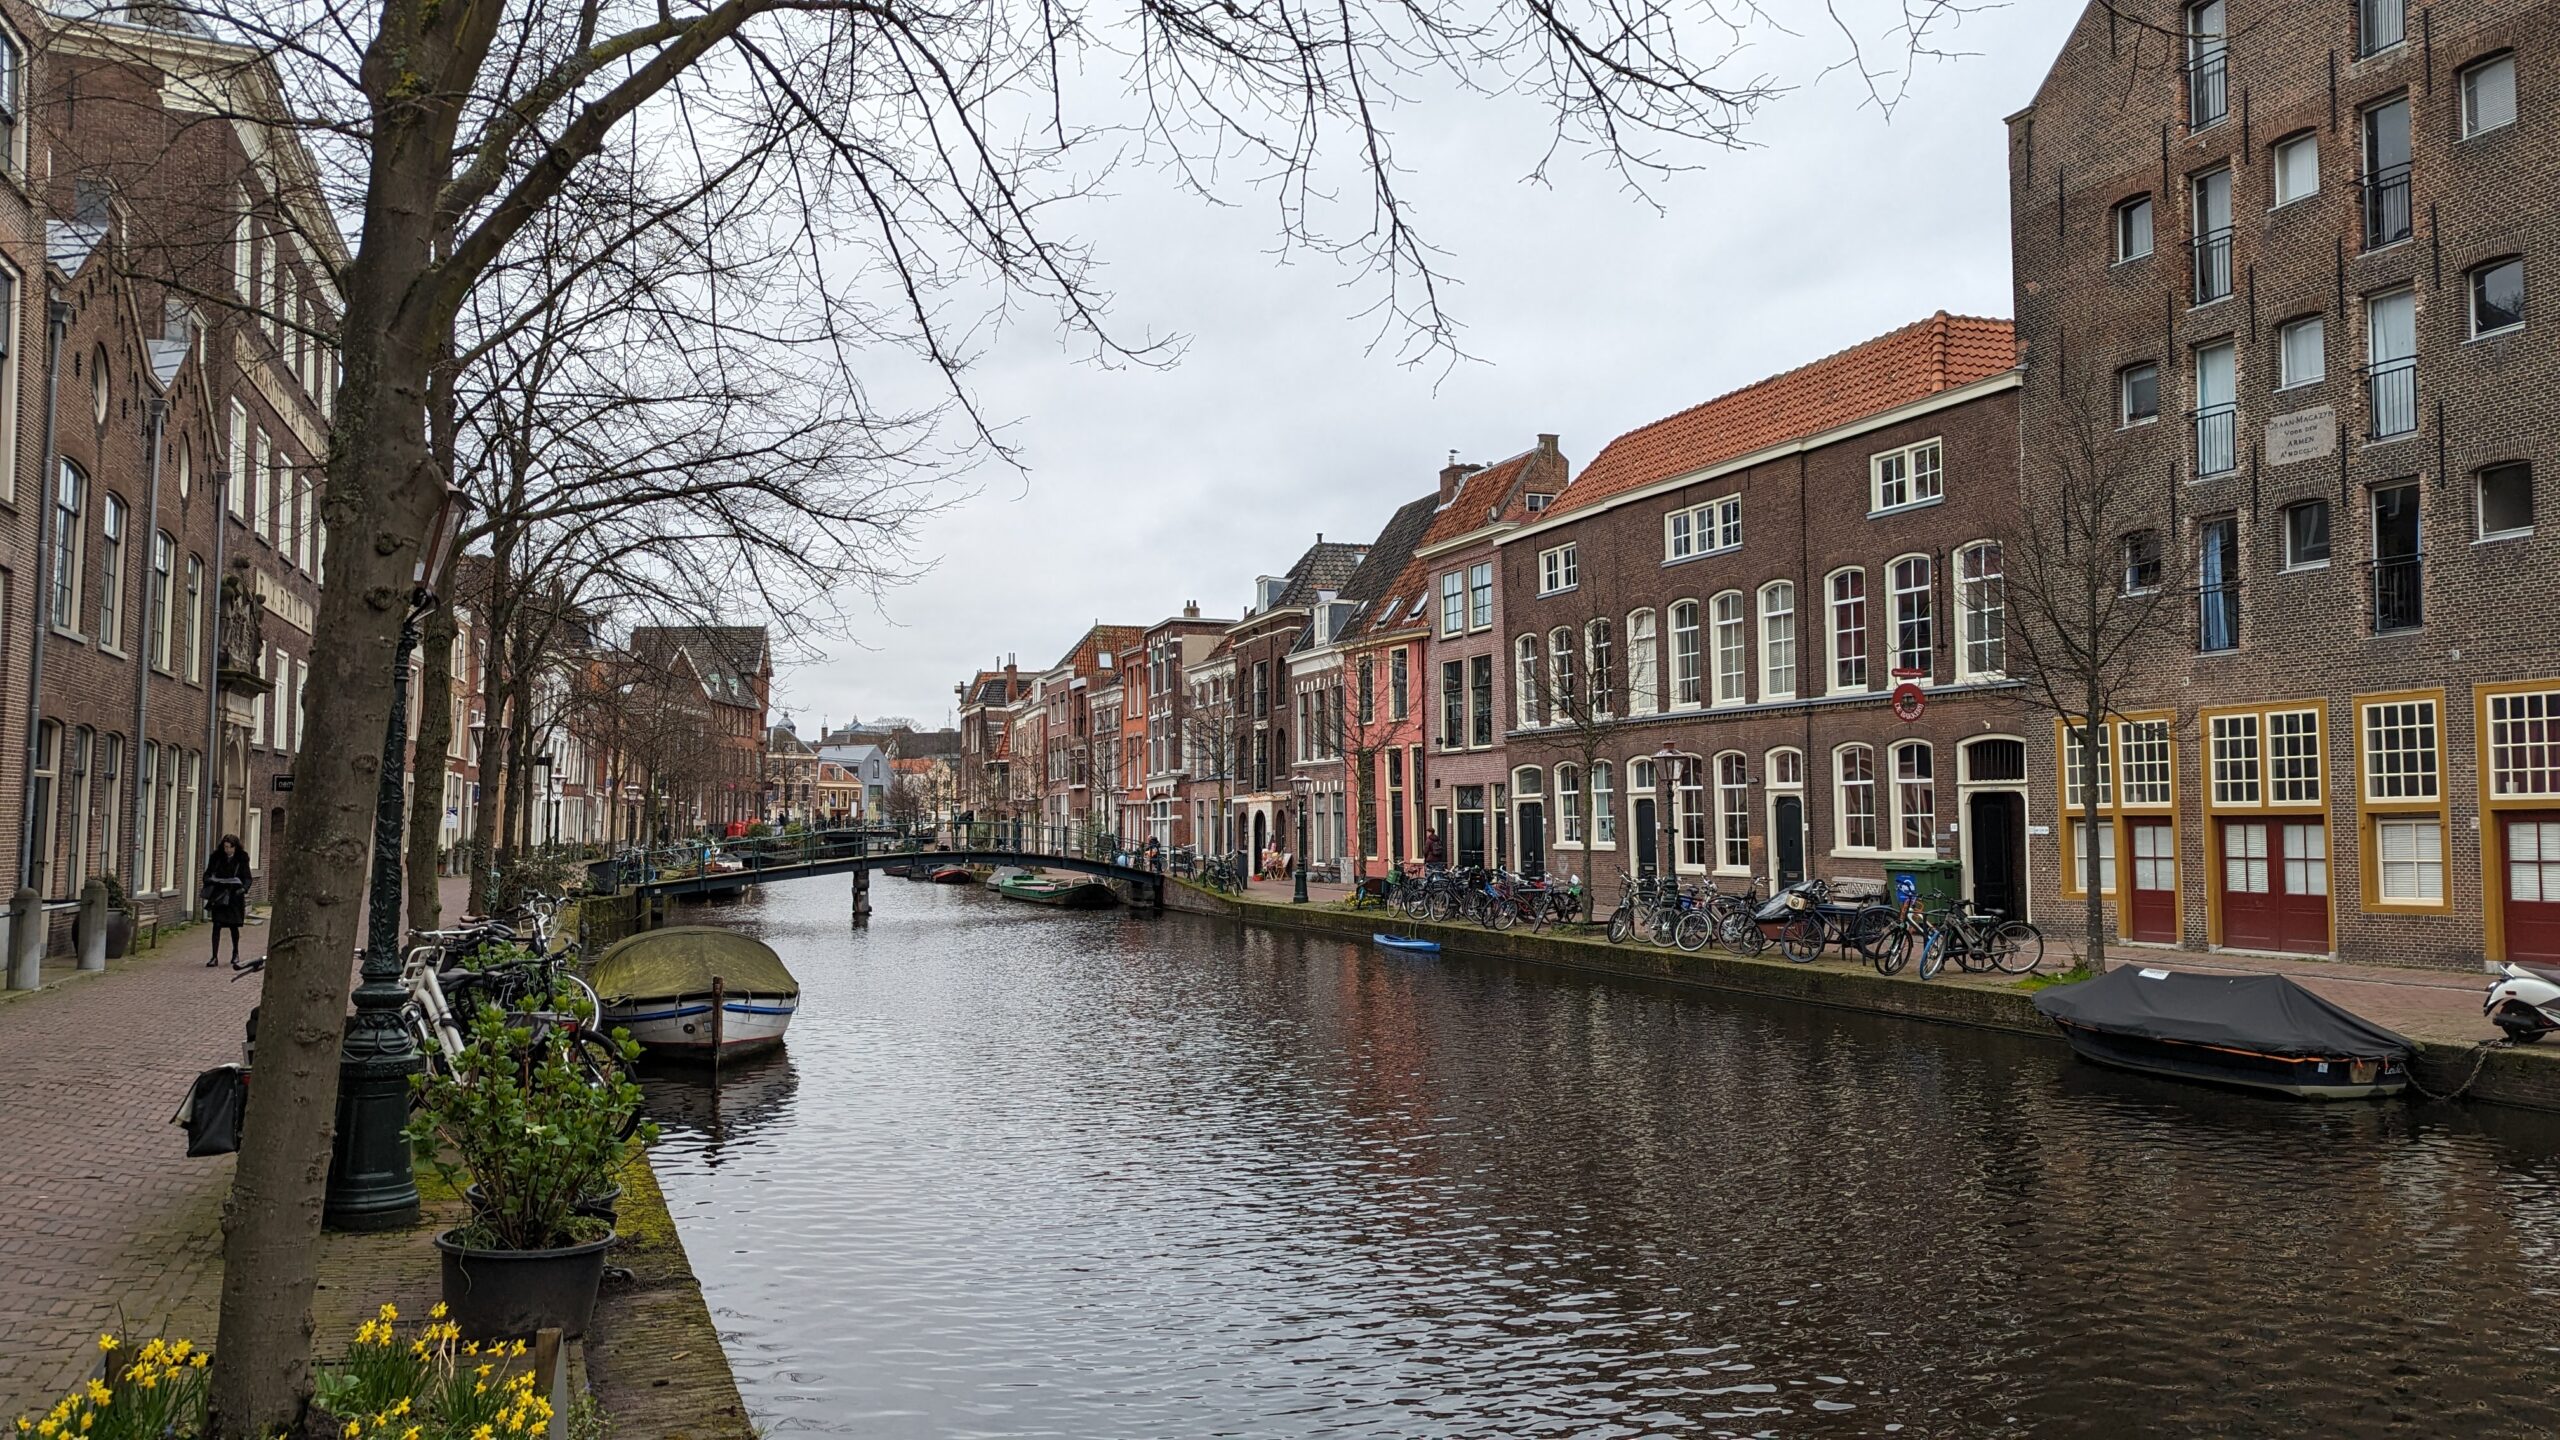 The image shows a small river and residential buildings in Leiden, the Netherlands.